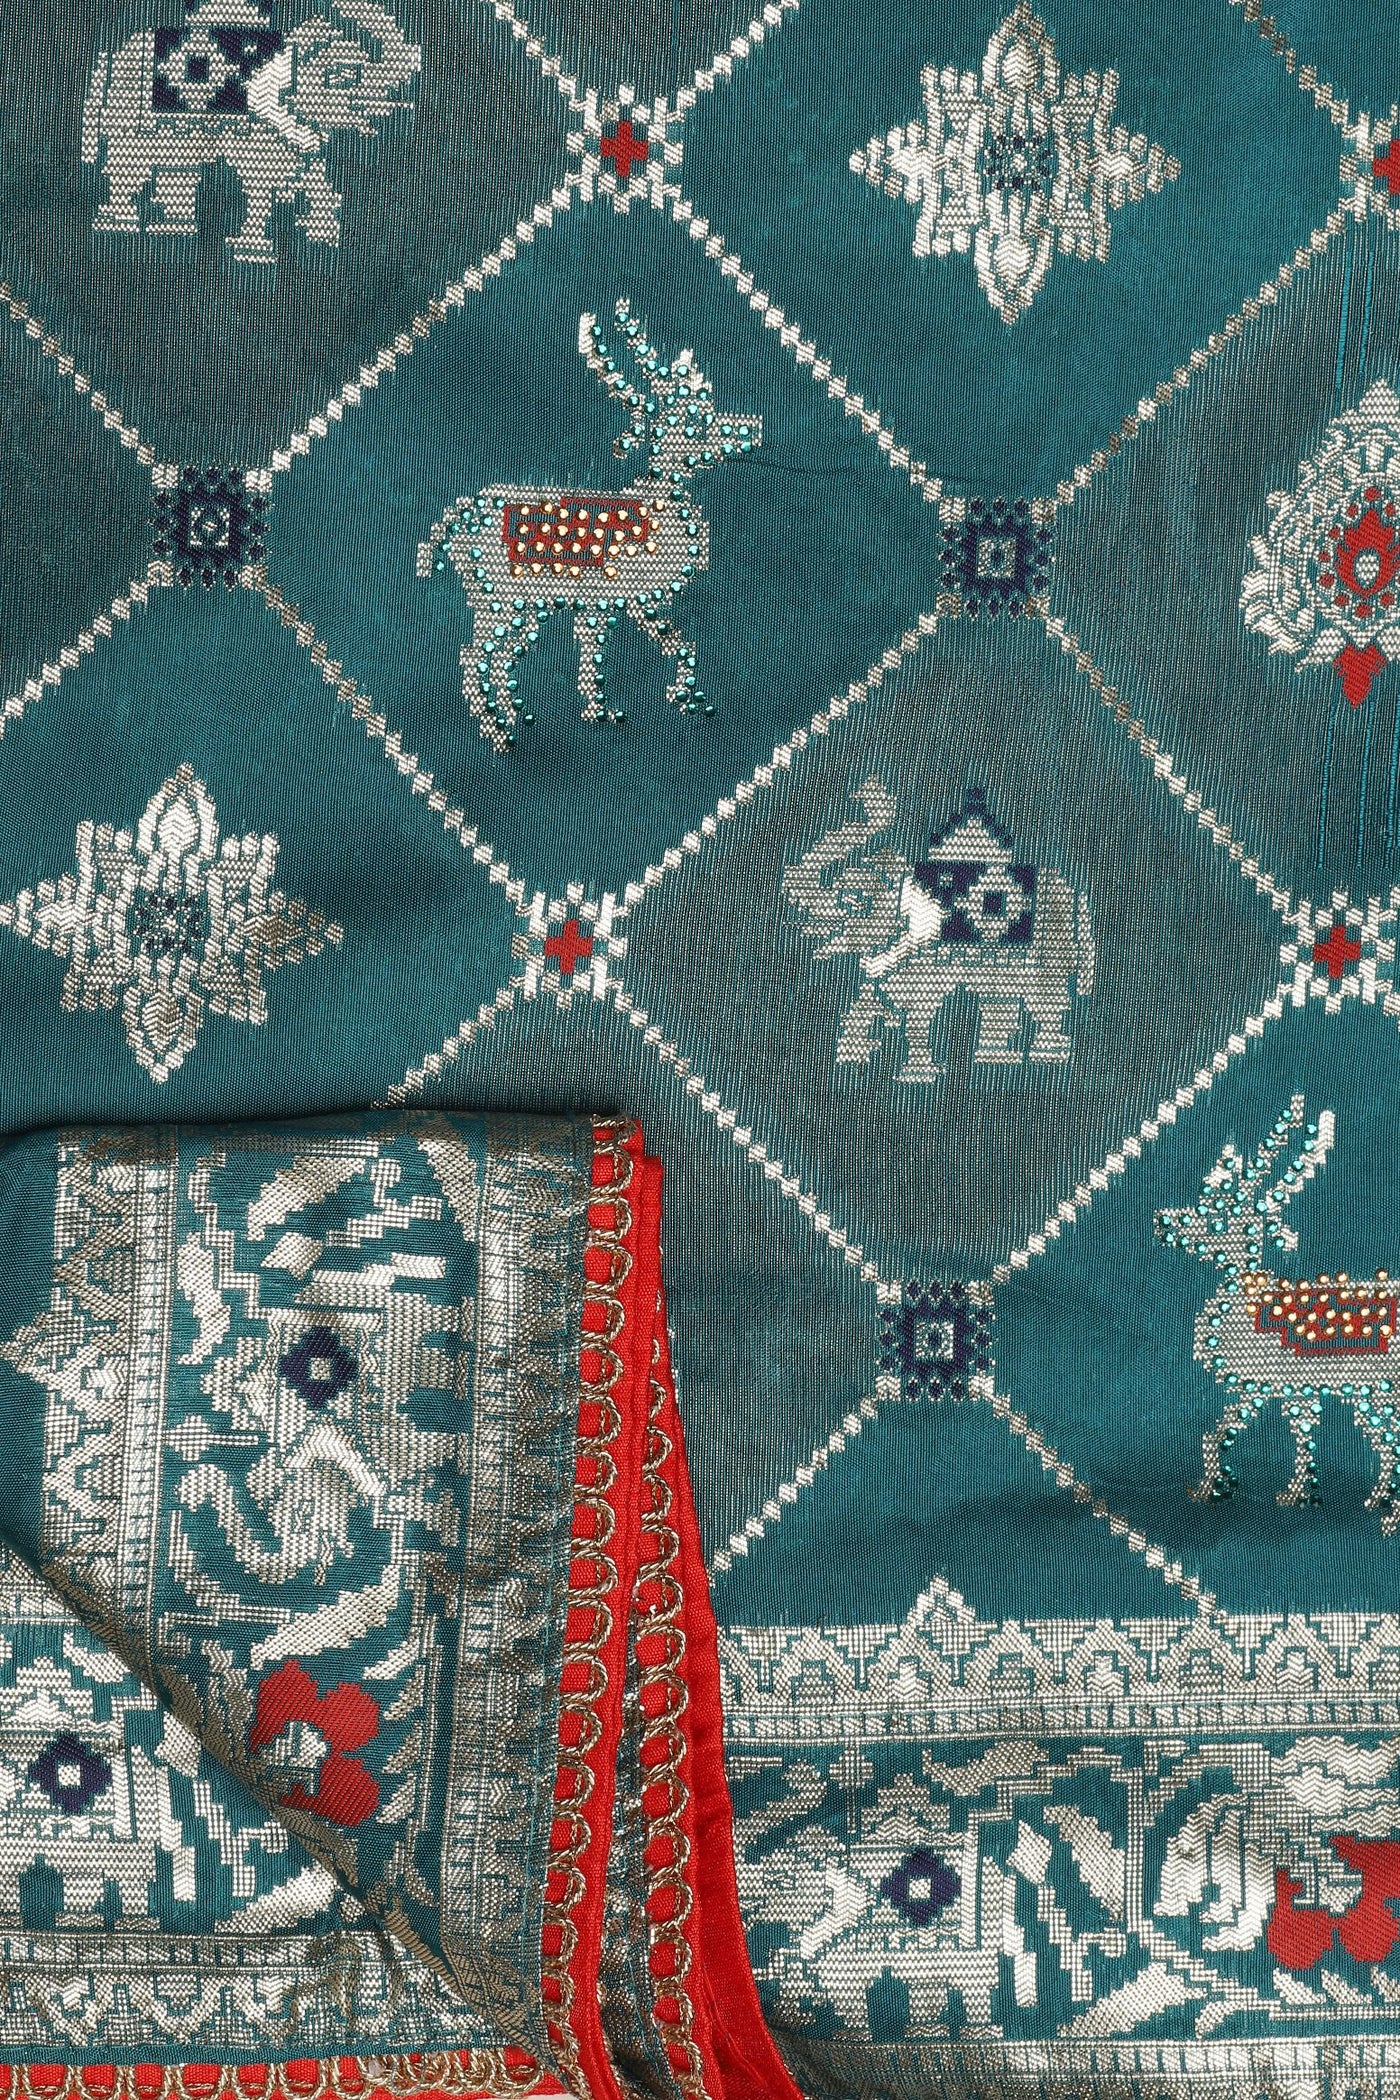 Exquisite Mosaic Blue Saree with Geometric & Elephant Motif, Sequins, and Zari Embroidery